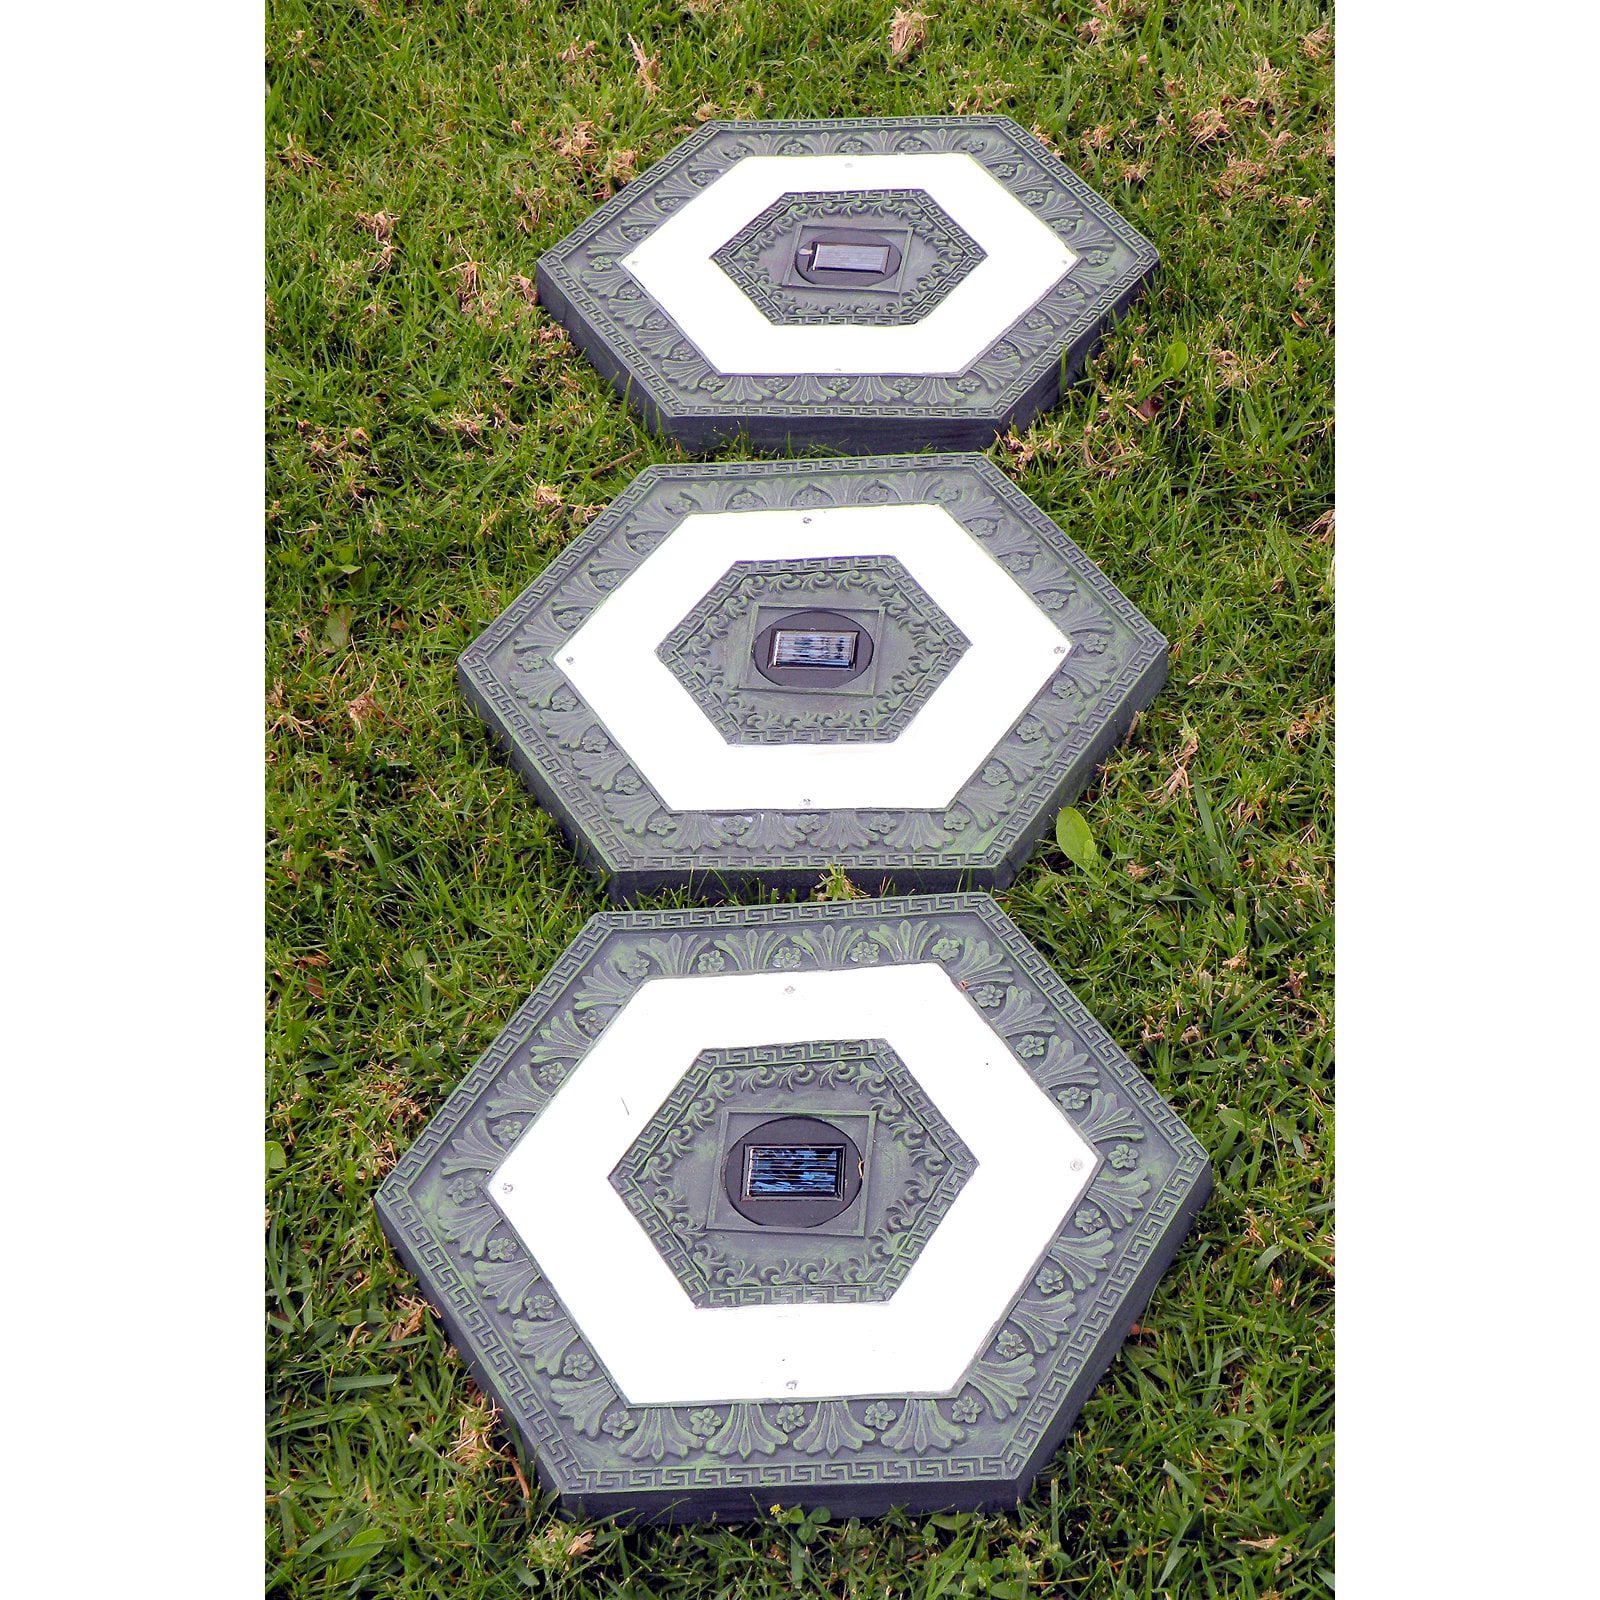 Homebrite Solar LED Round Stepping Stones Oyster Grey Set of 3 Outdoor Light 